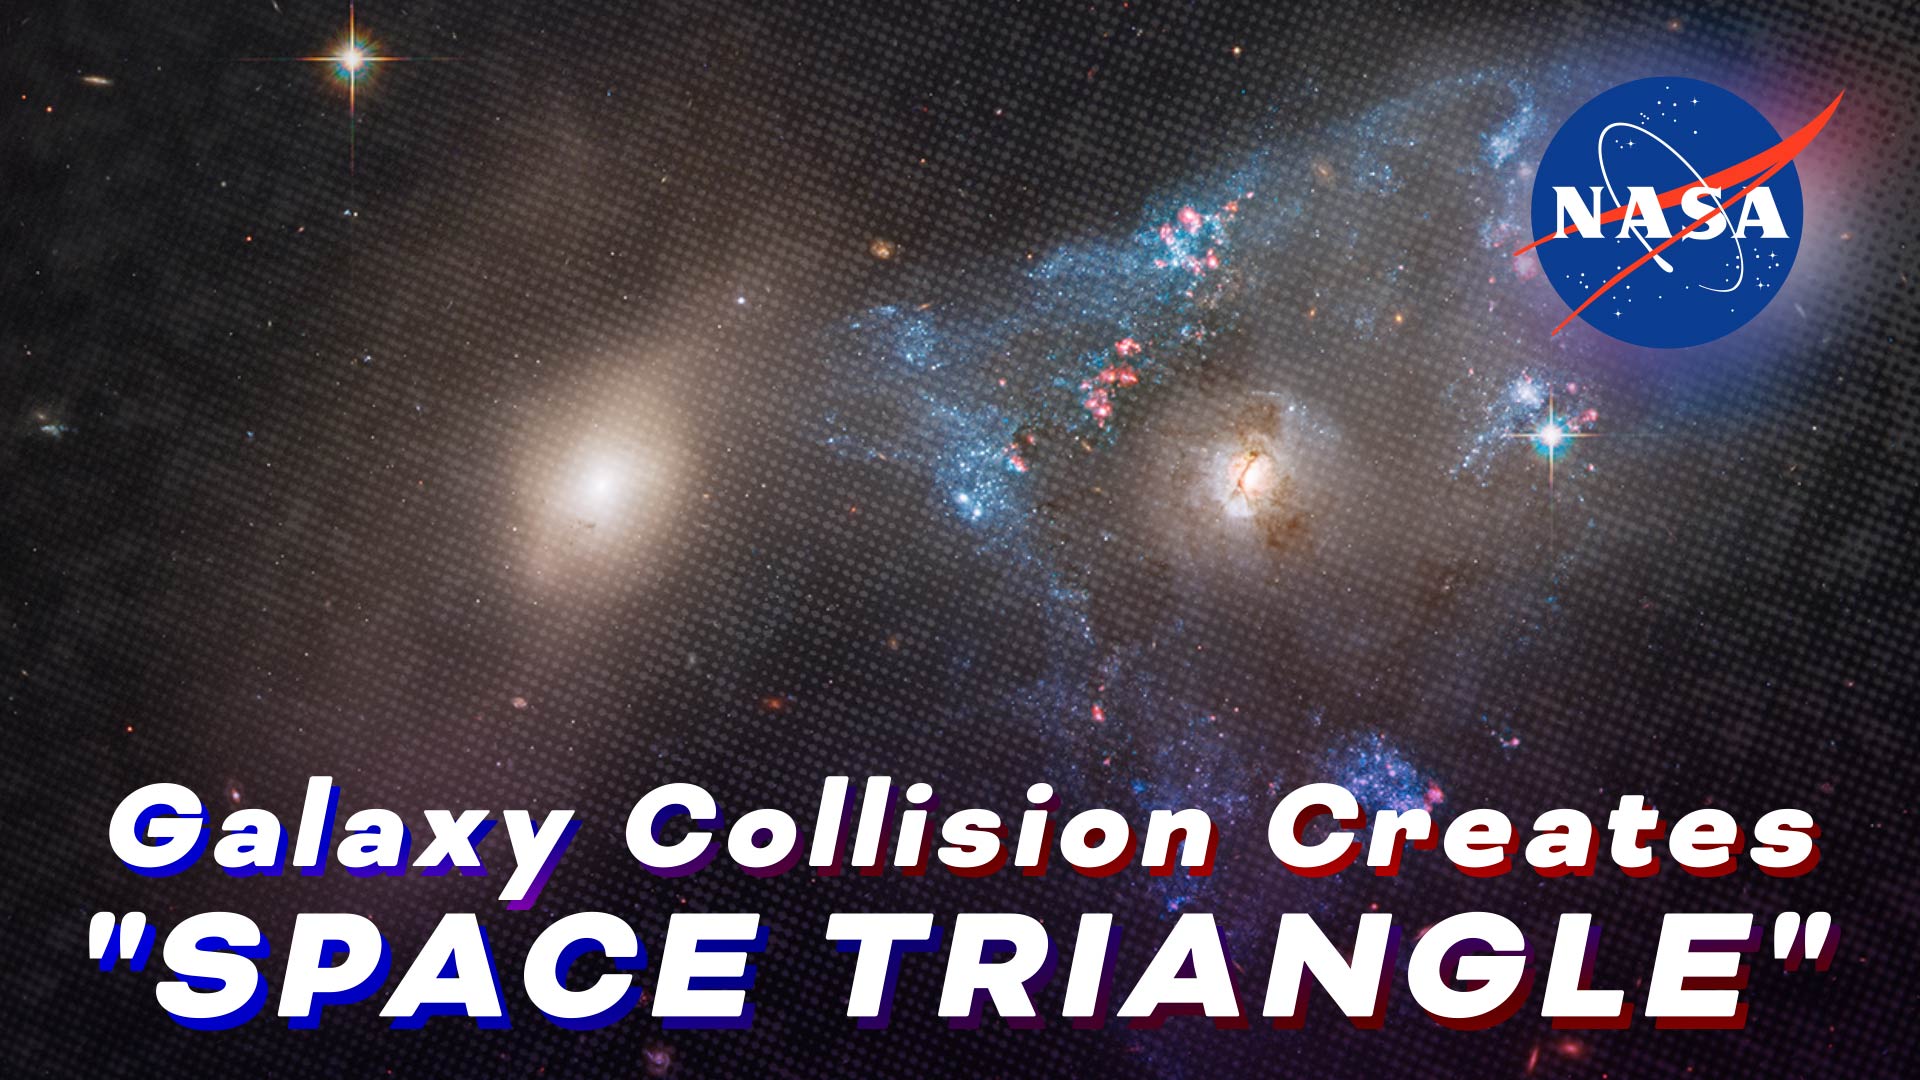 Preview Image for Galaxy Collision Creates "Space Triangle" in New Hubble Image